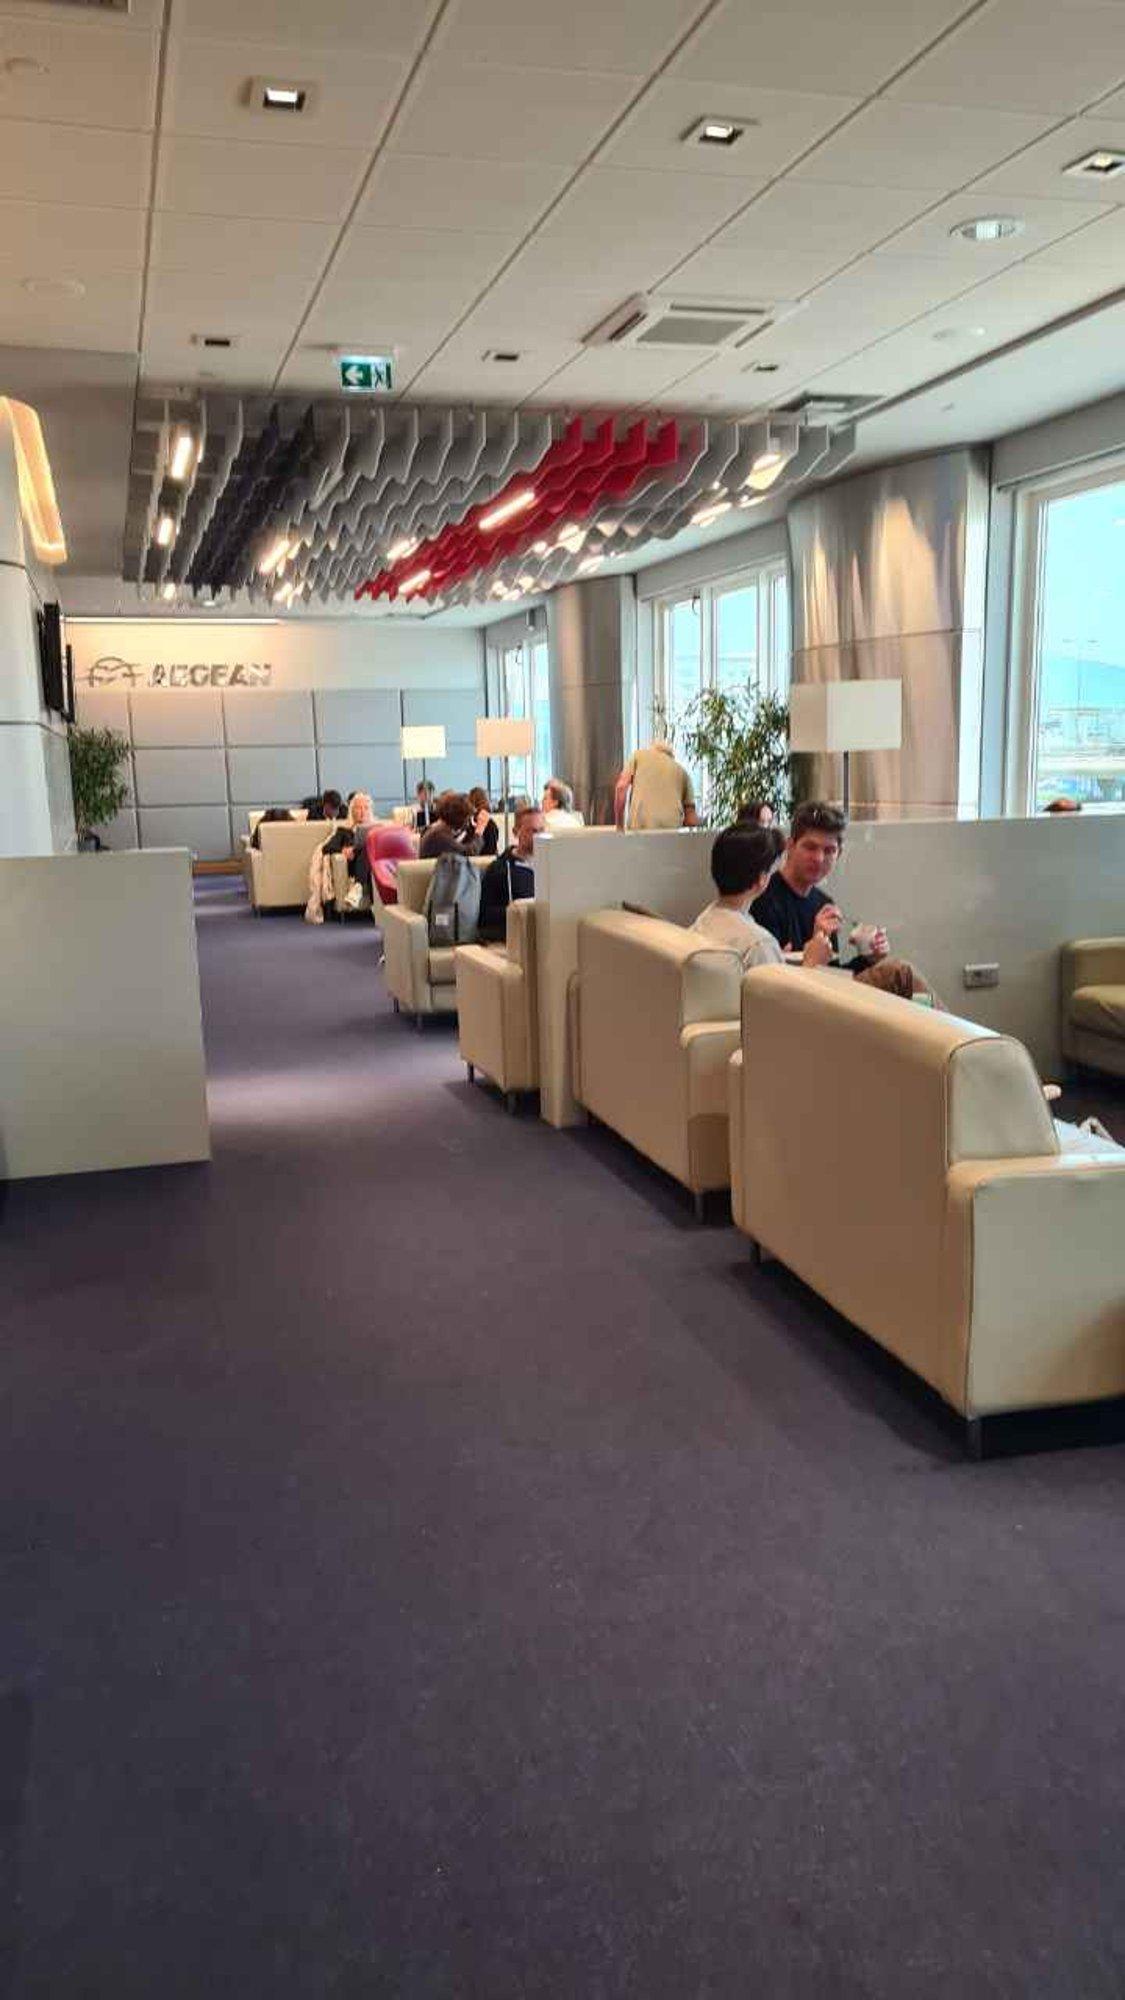 Aegean Business Lounge image 9 of 12